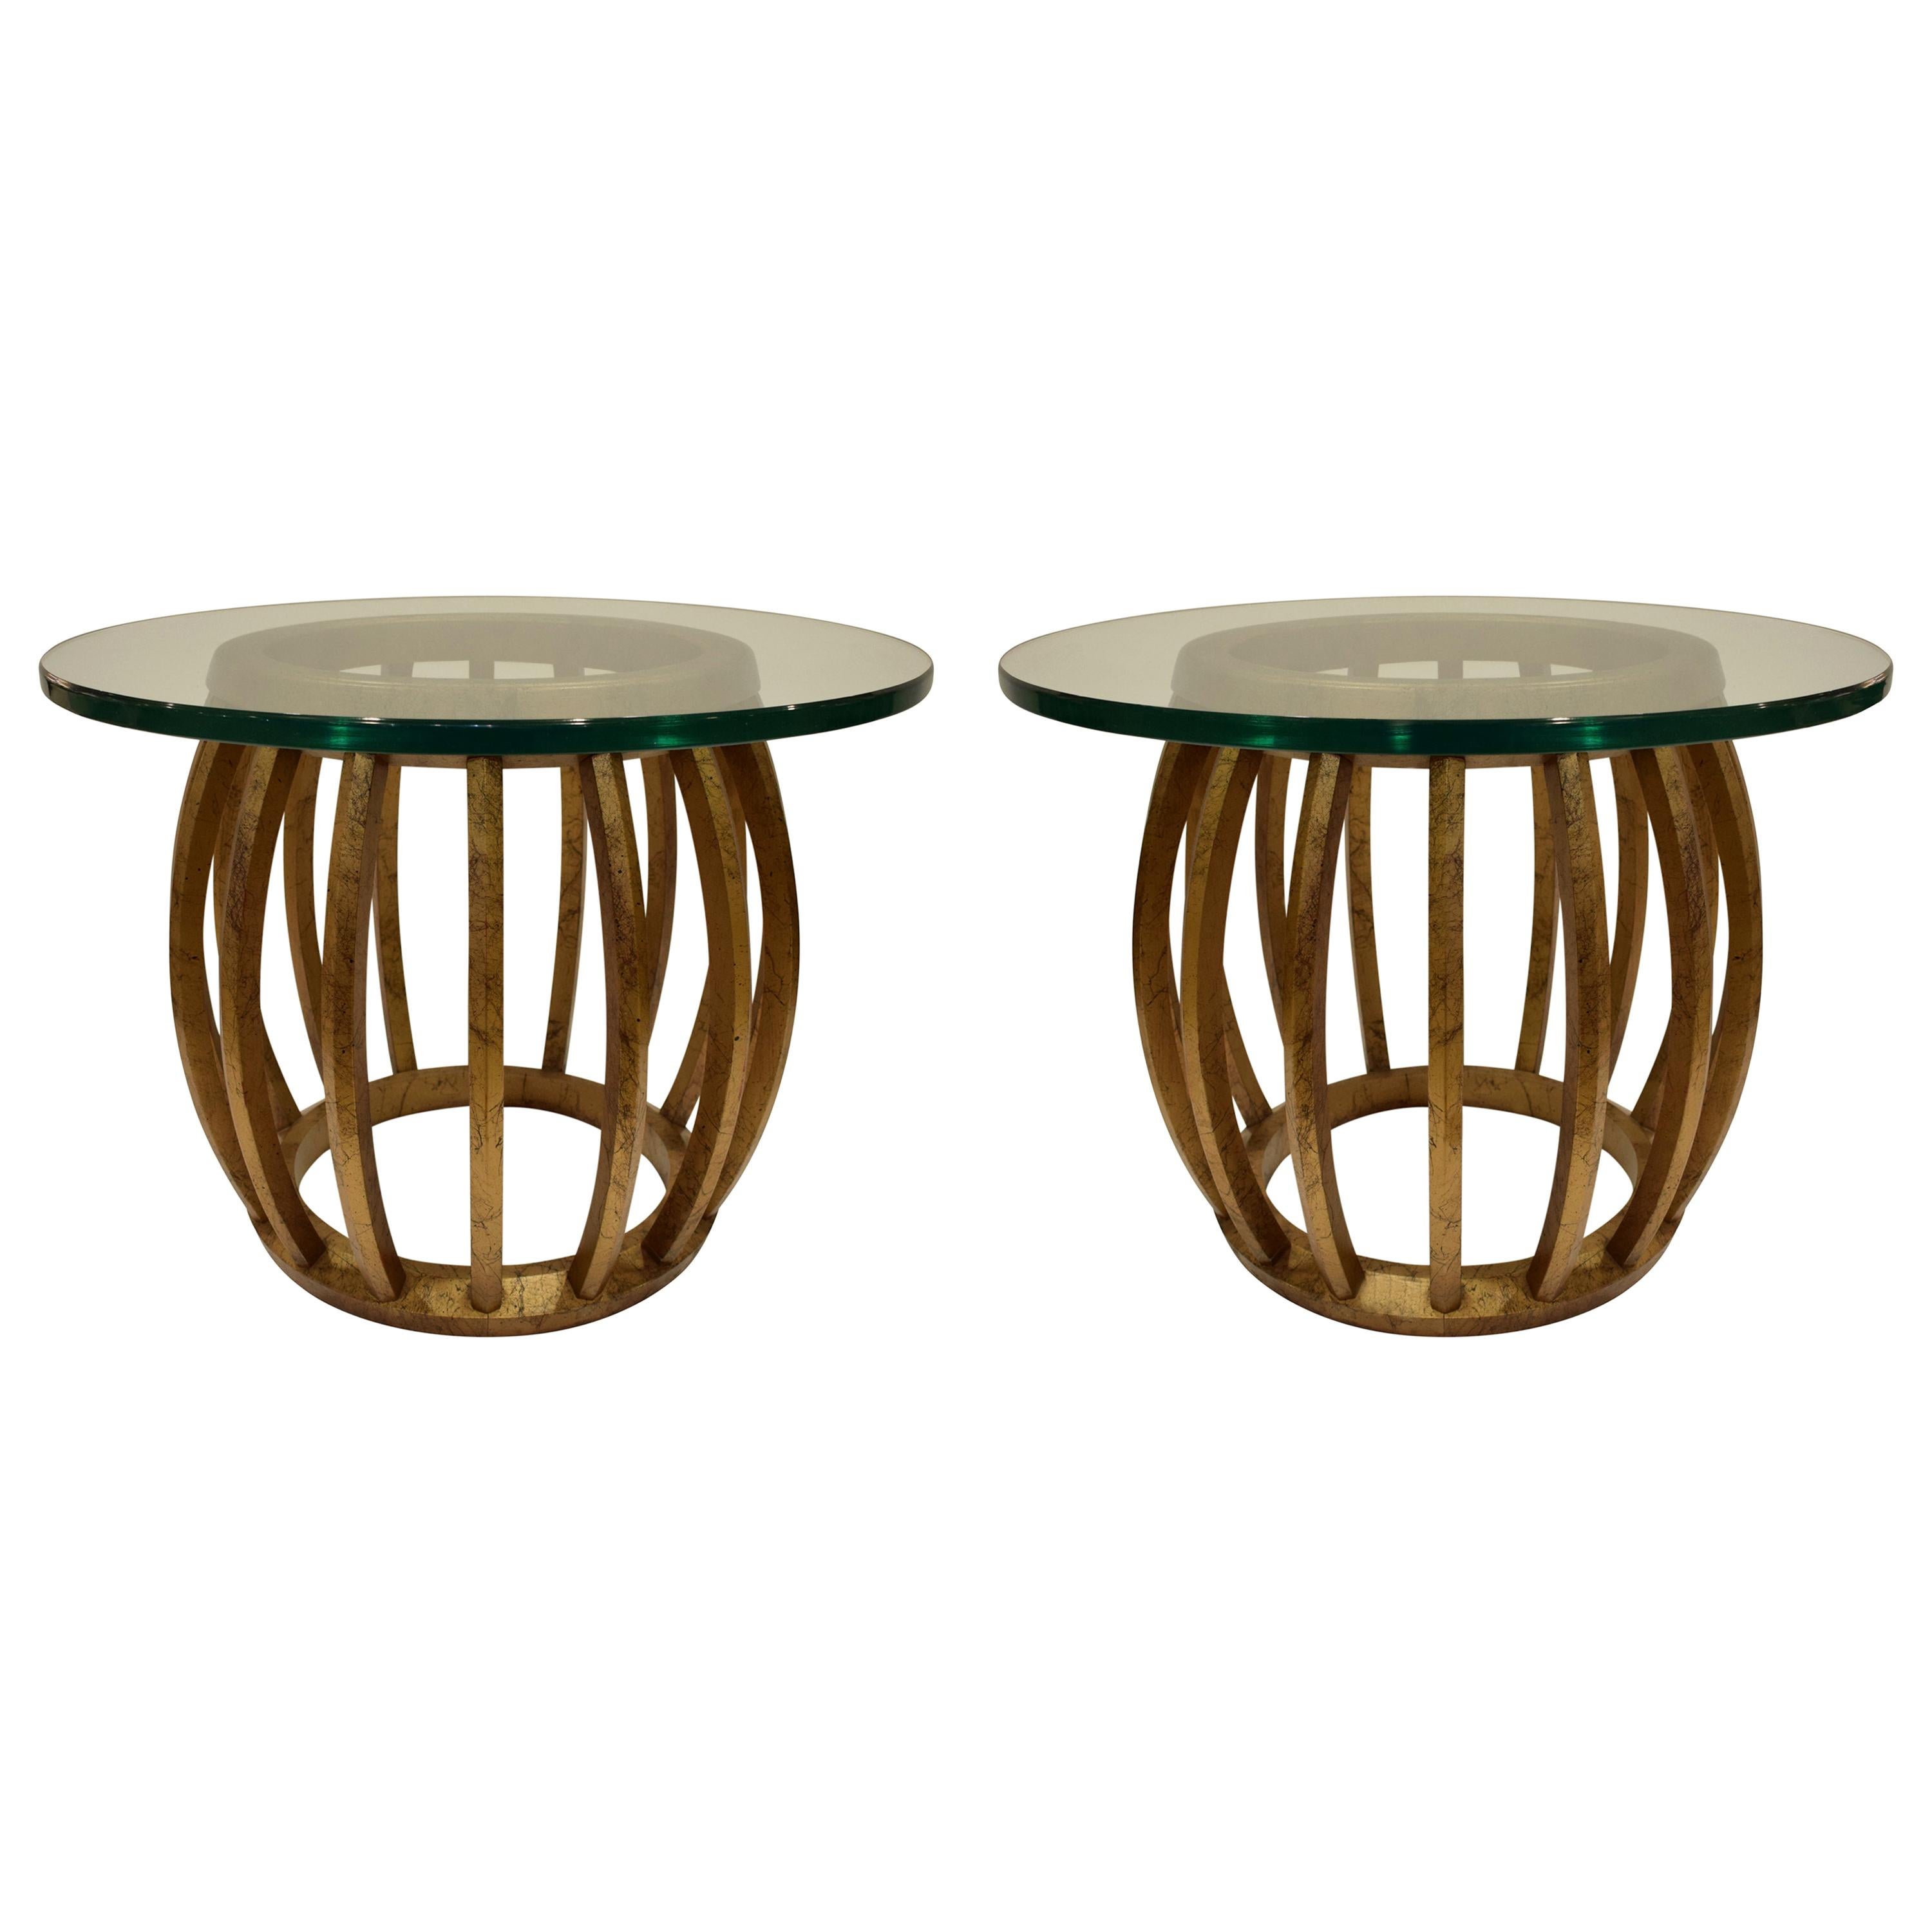 Pair of Sculptural Gilded Wood Side Tables with Glass Tops, 1960s